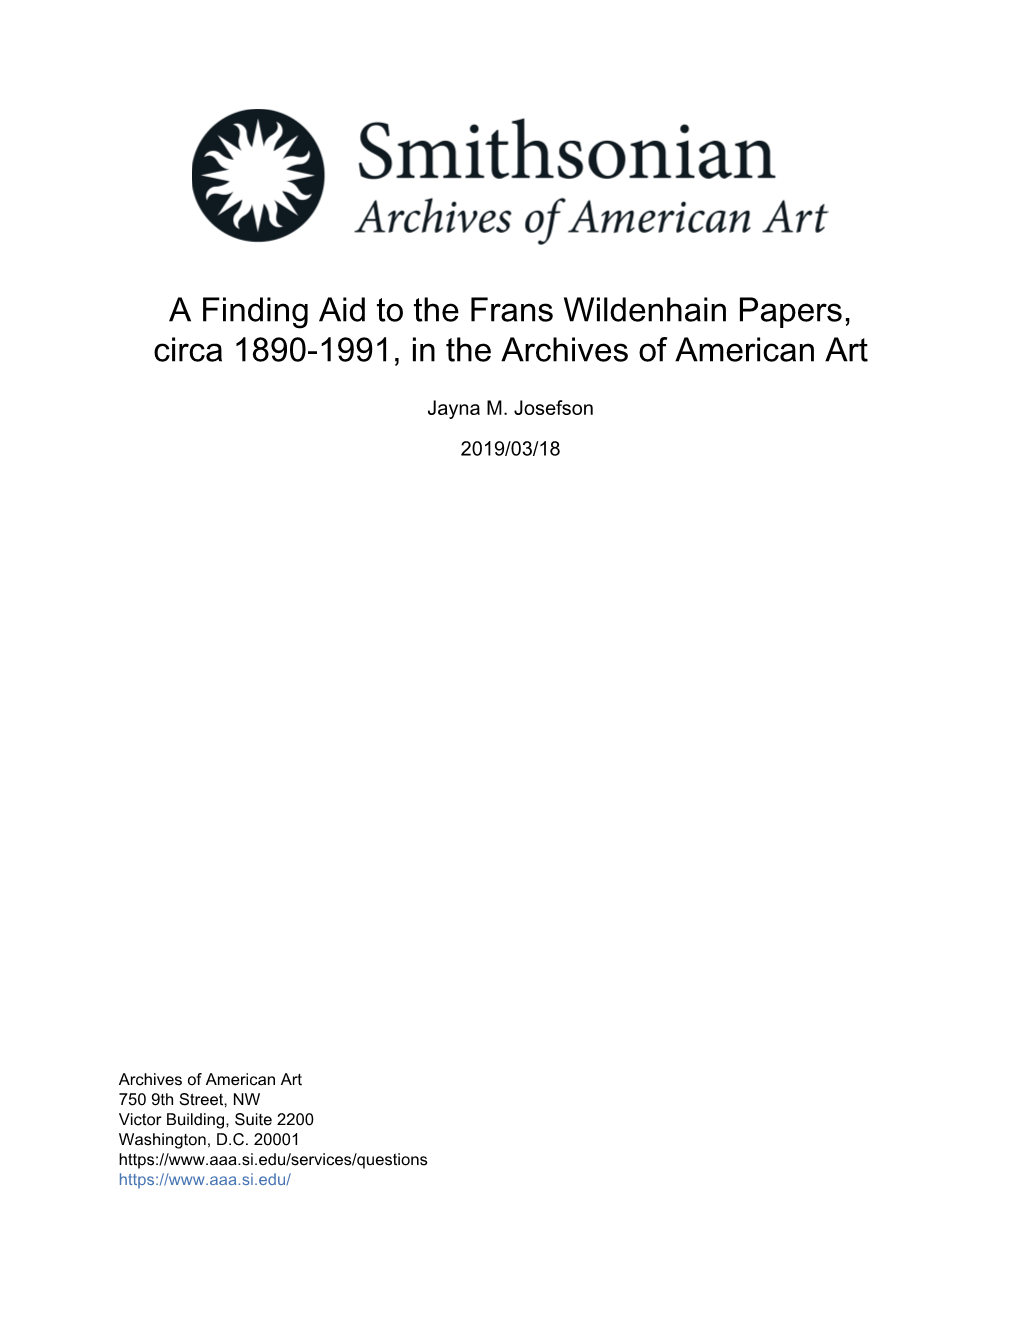 A Finding Aid to the Frans Wildenhain Papers, Circa 1890-1991, in the Archives of American Art